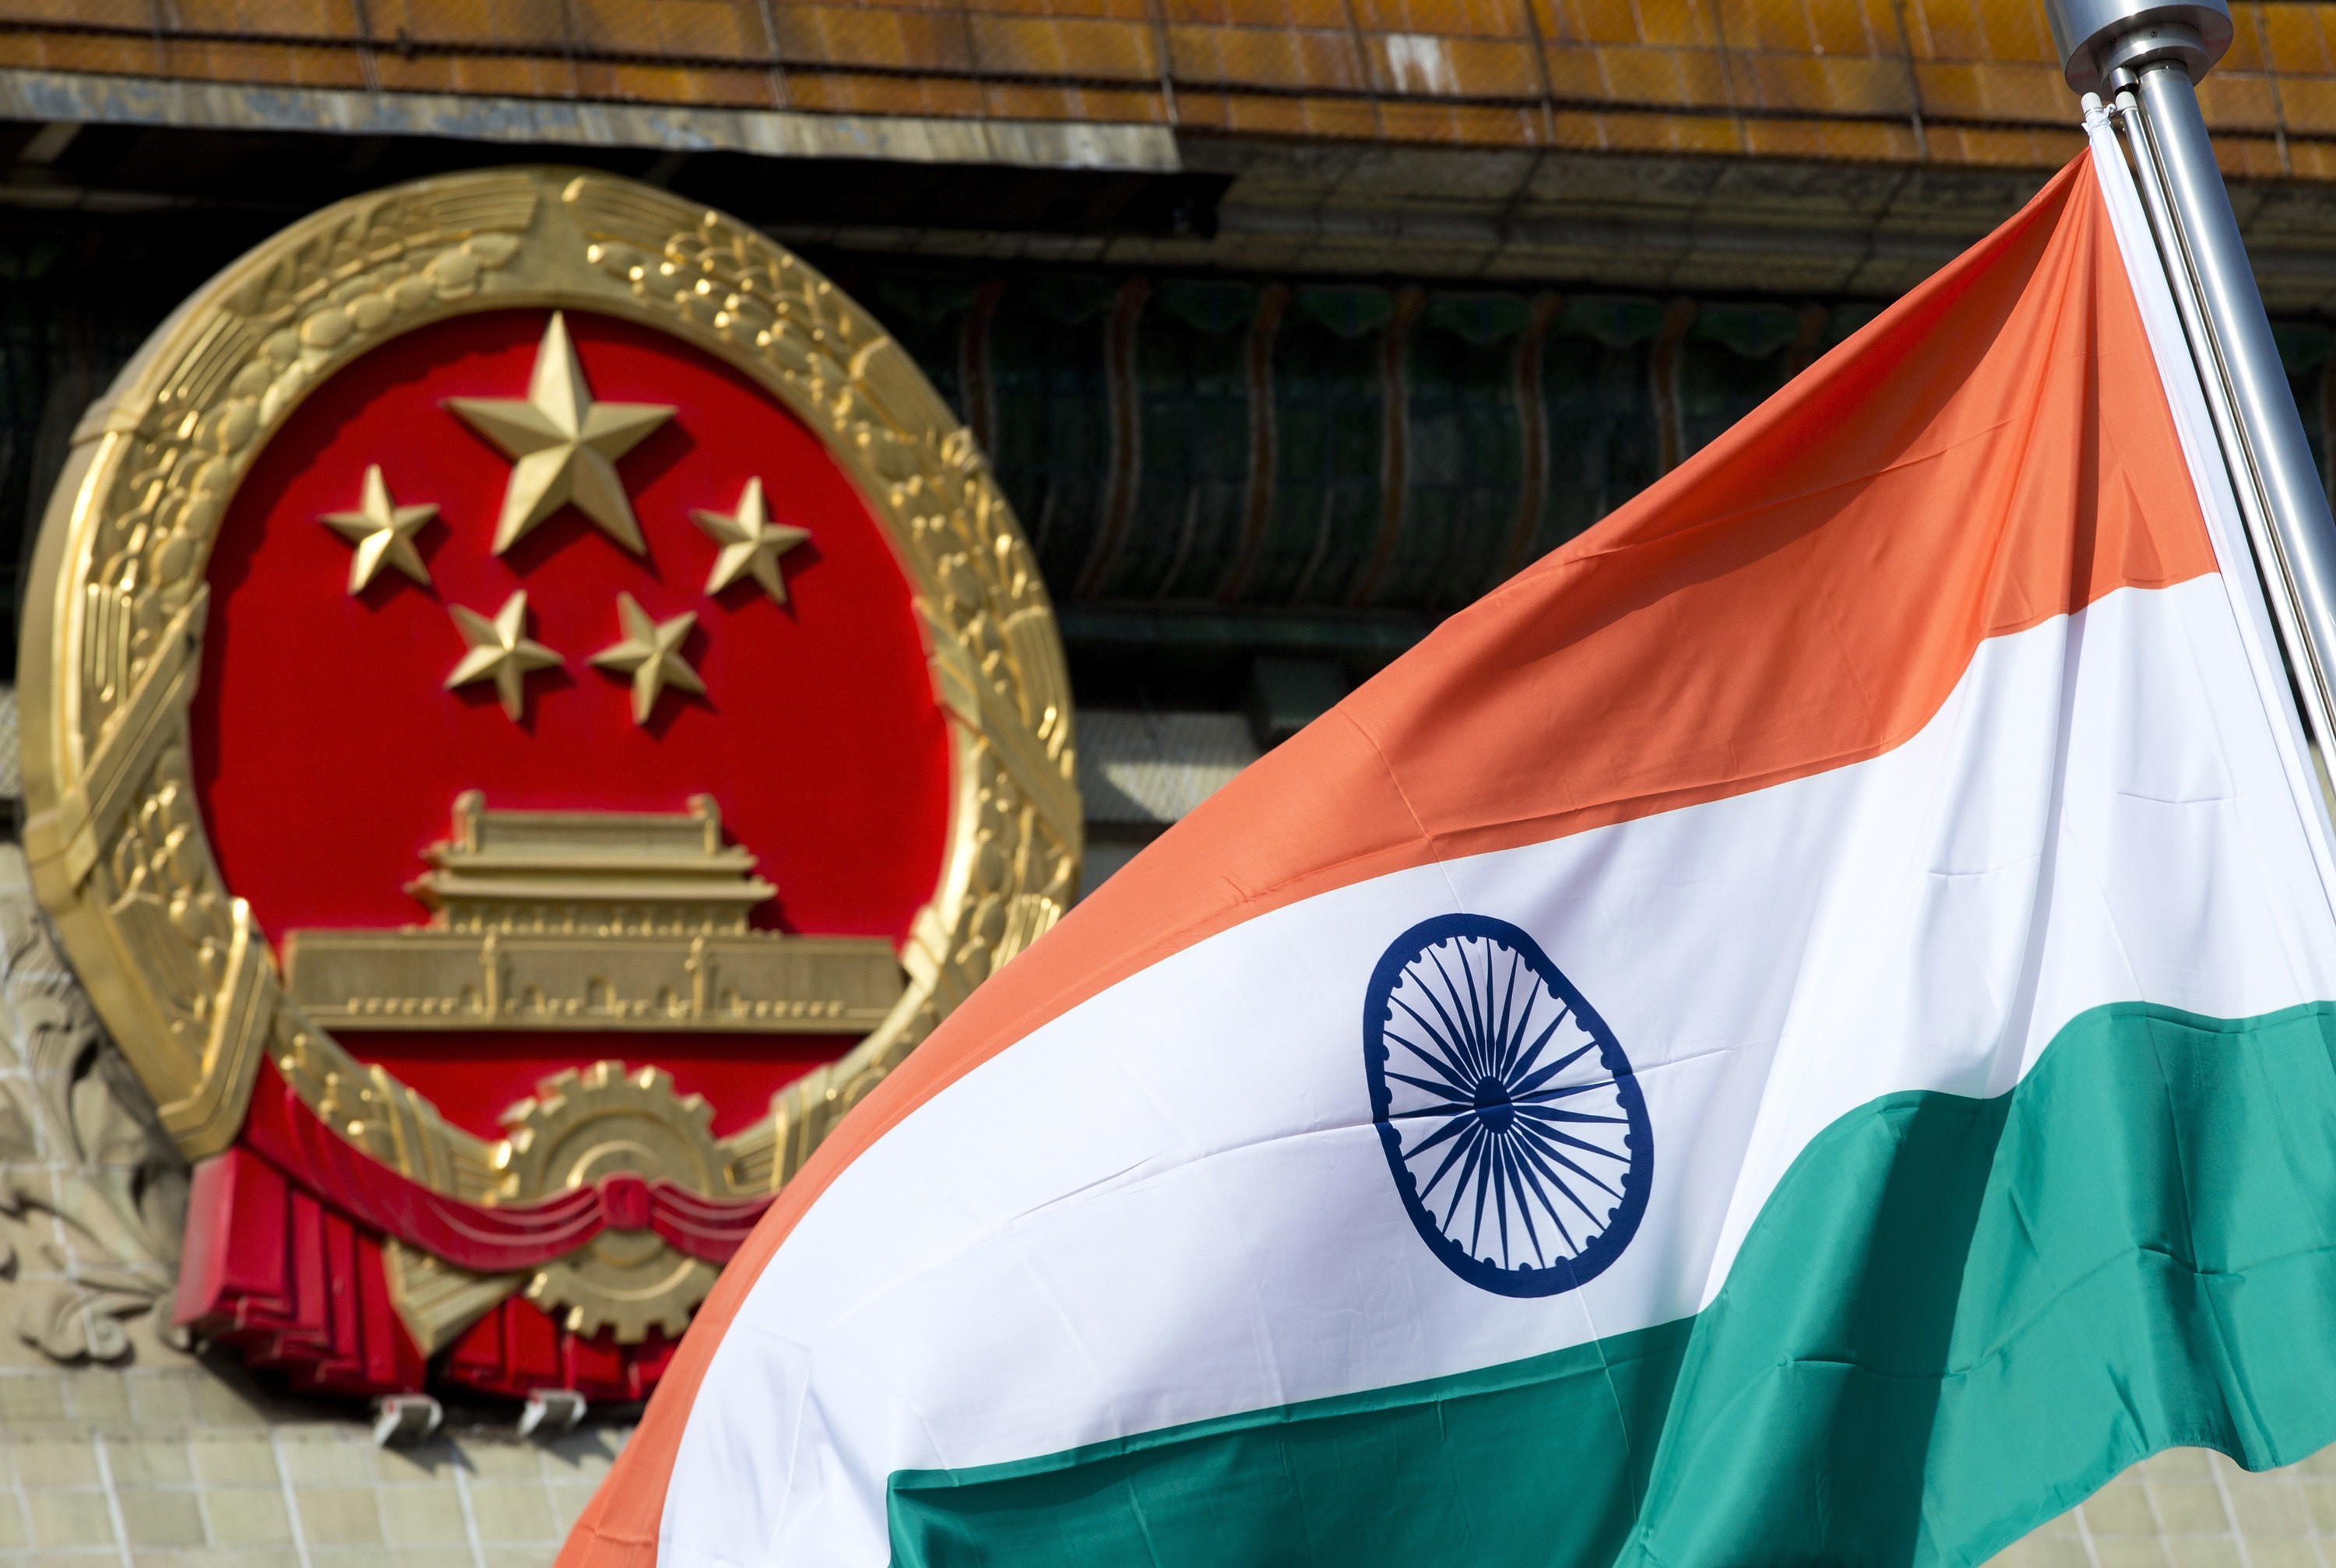 The Indian national flag is flown next to the Chinese national emblem in Beijing. Photo: AP